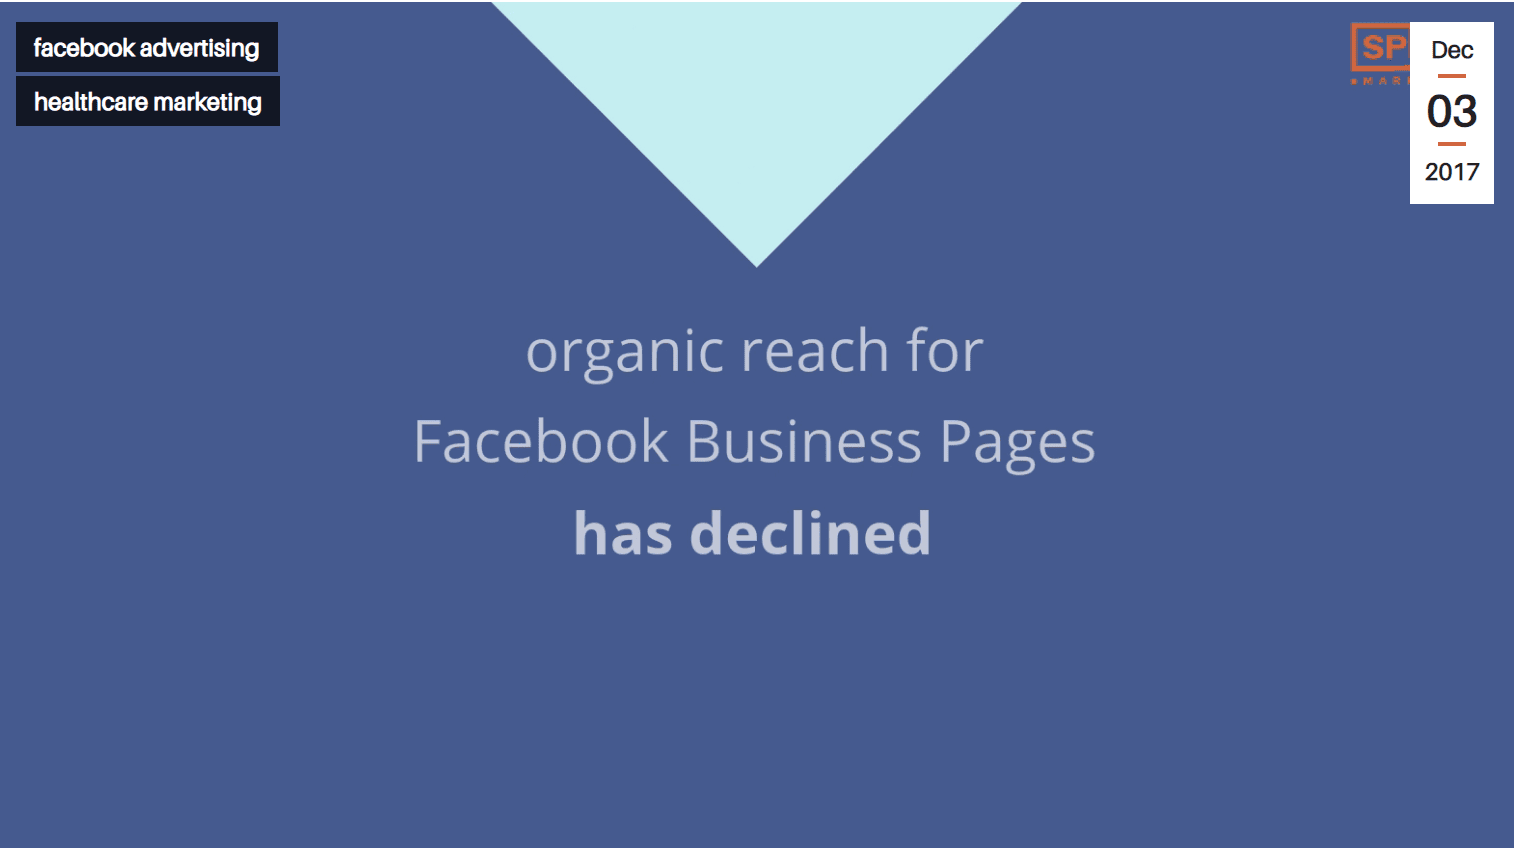 Facebook business pages has declined